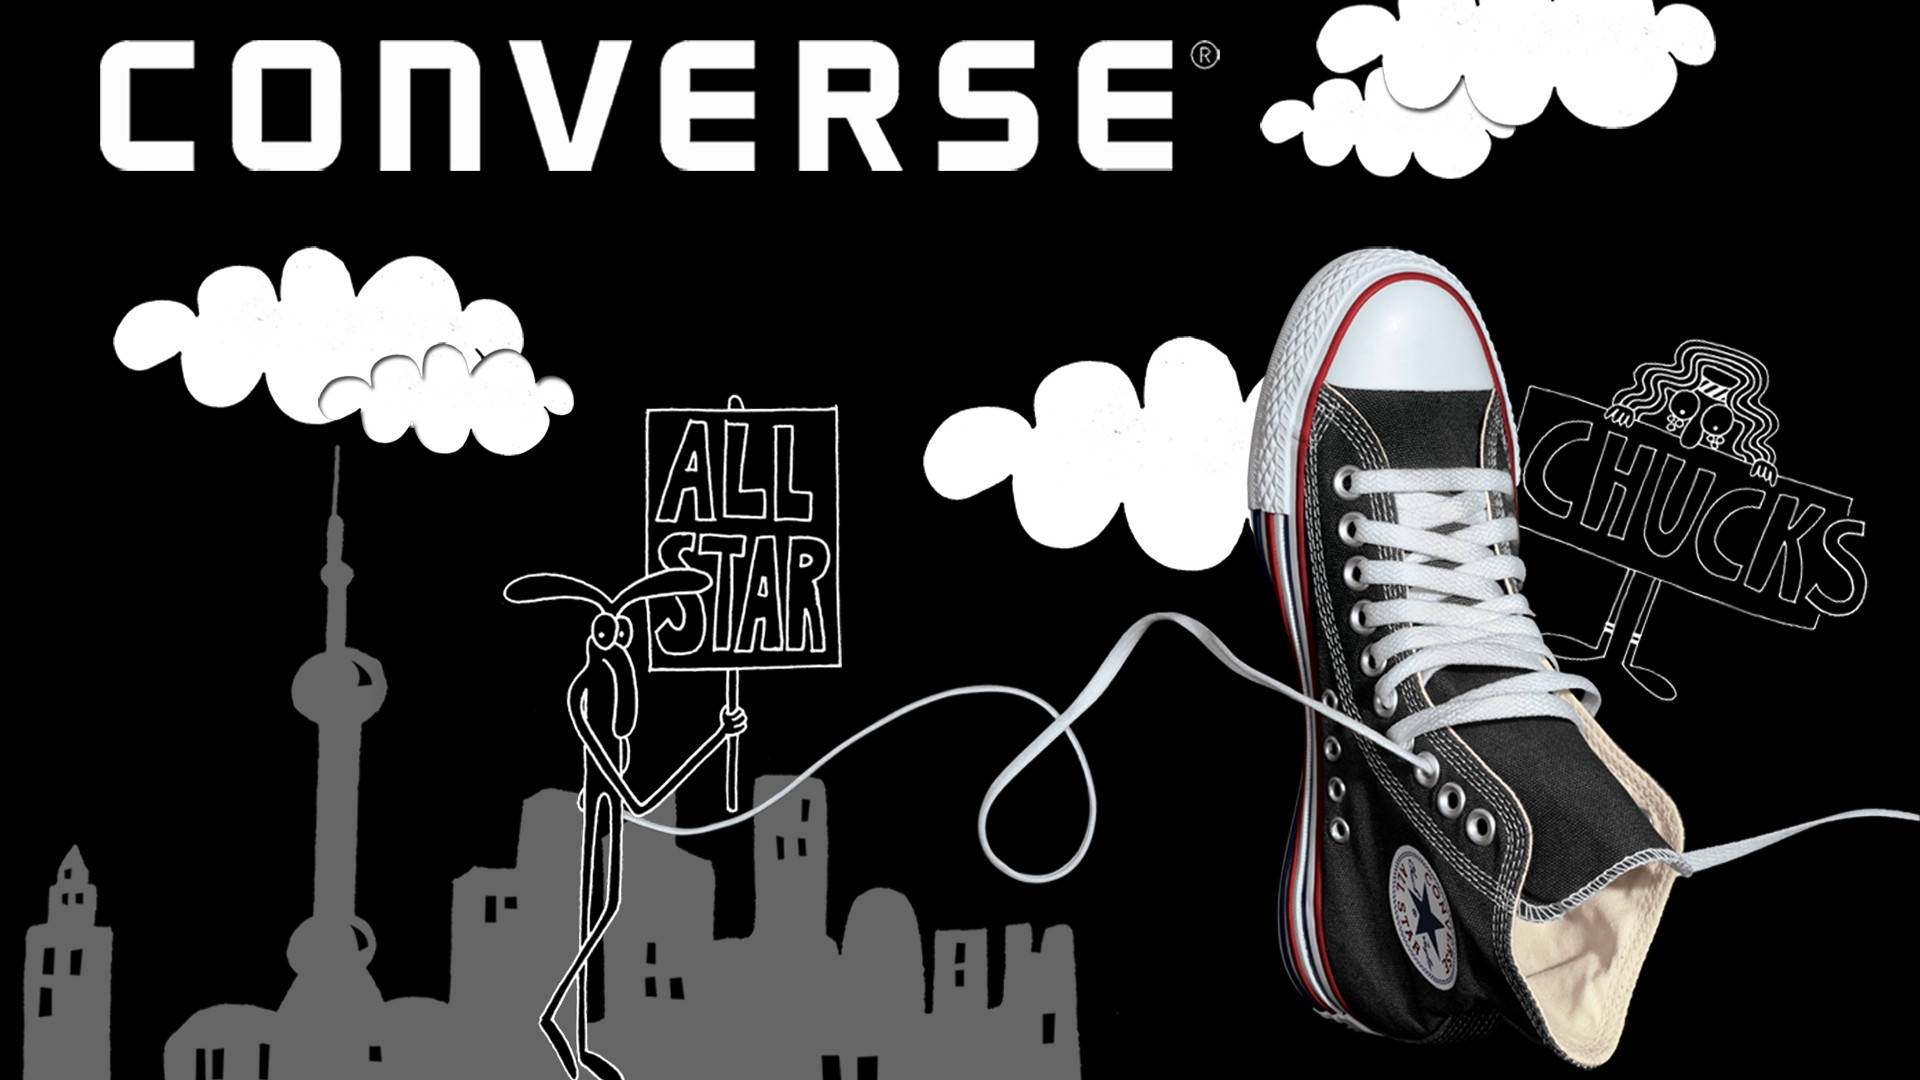 Converselogo Artwork Would Be Translated To German As 